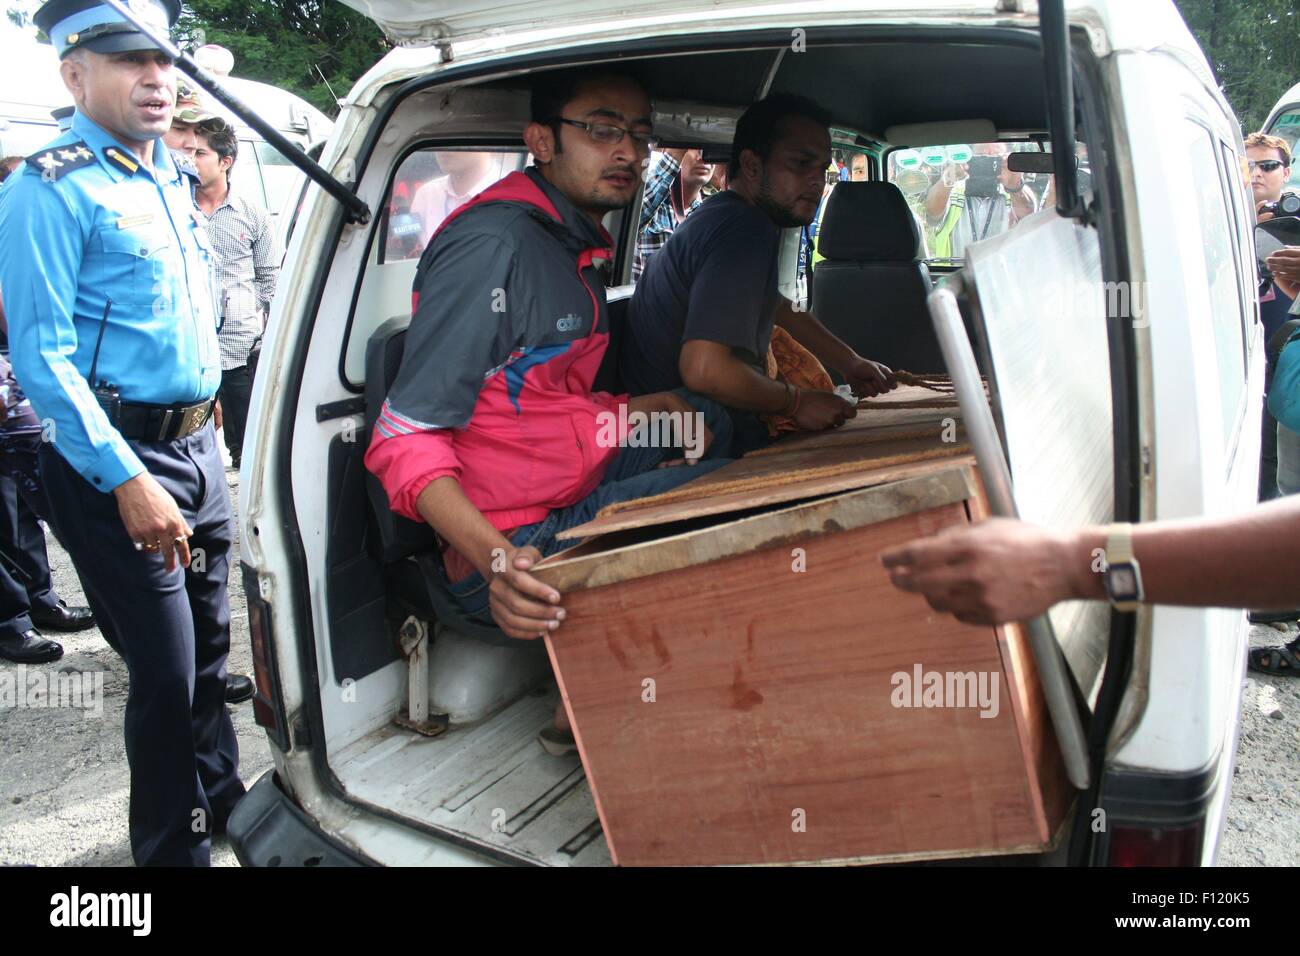 Kathmandu, Nepal. 25th Aug, 2015. The dead body of Senior Superintendent of Police (SSP) Laxman Neupane killed in a clash with protesters at Tikapur is brought to capital for further funeral procession in Kathmandu, Nepal, Aug. 25, 2015. The death toll in the violent clash that erupted over the proposed federalism in the far western Nepal has reached to 20, local media reported. © Sunil Sharma/Xinhua/Alamy Live News Stock Photo